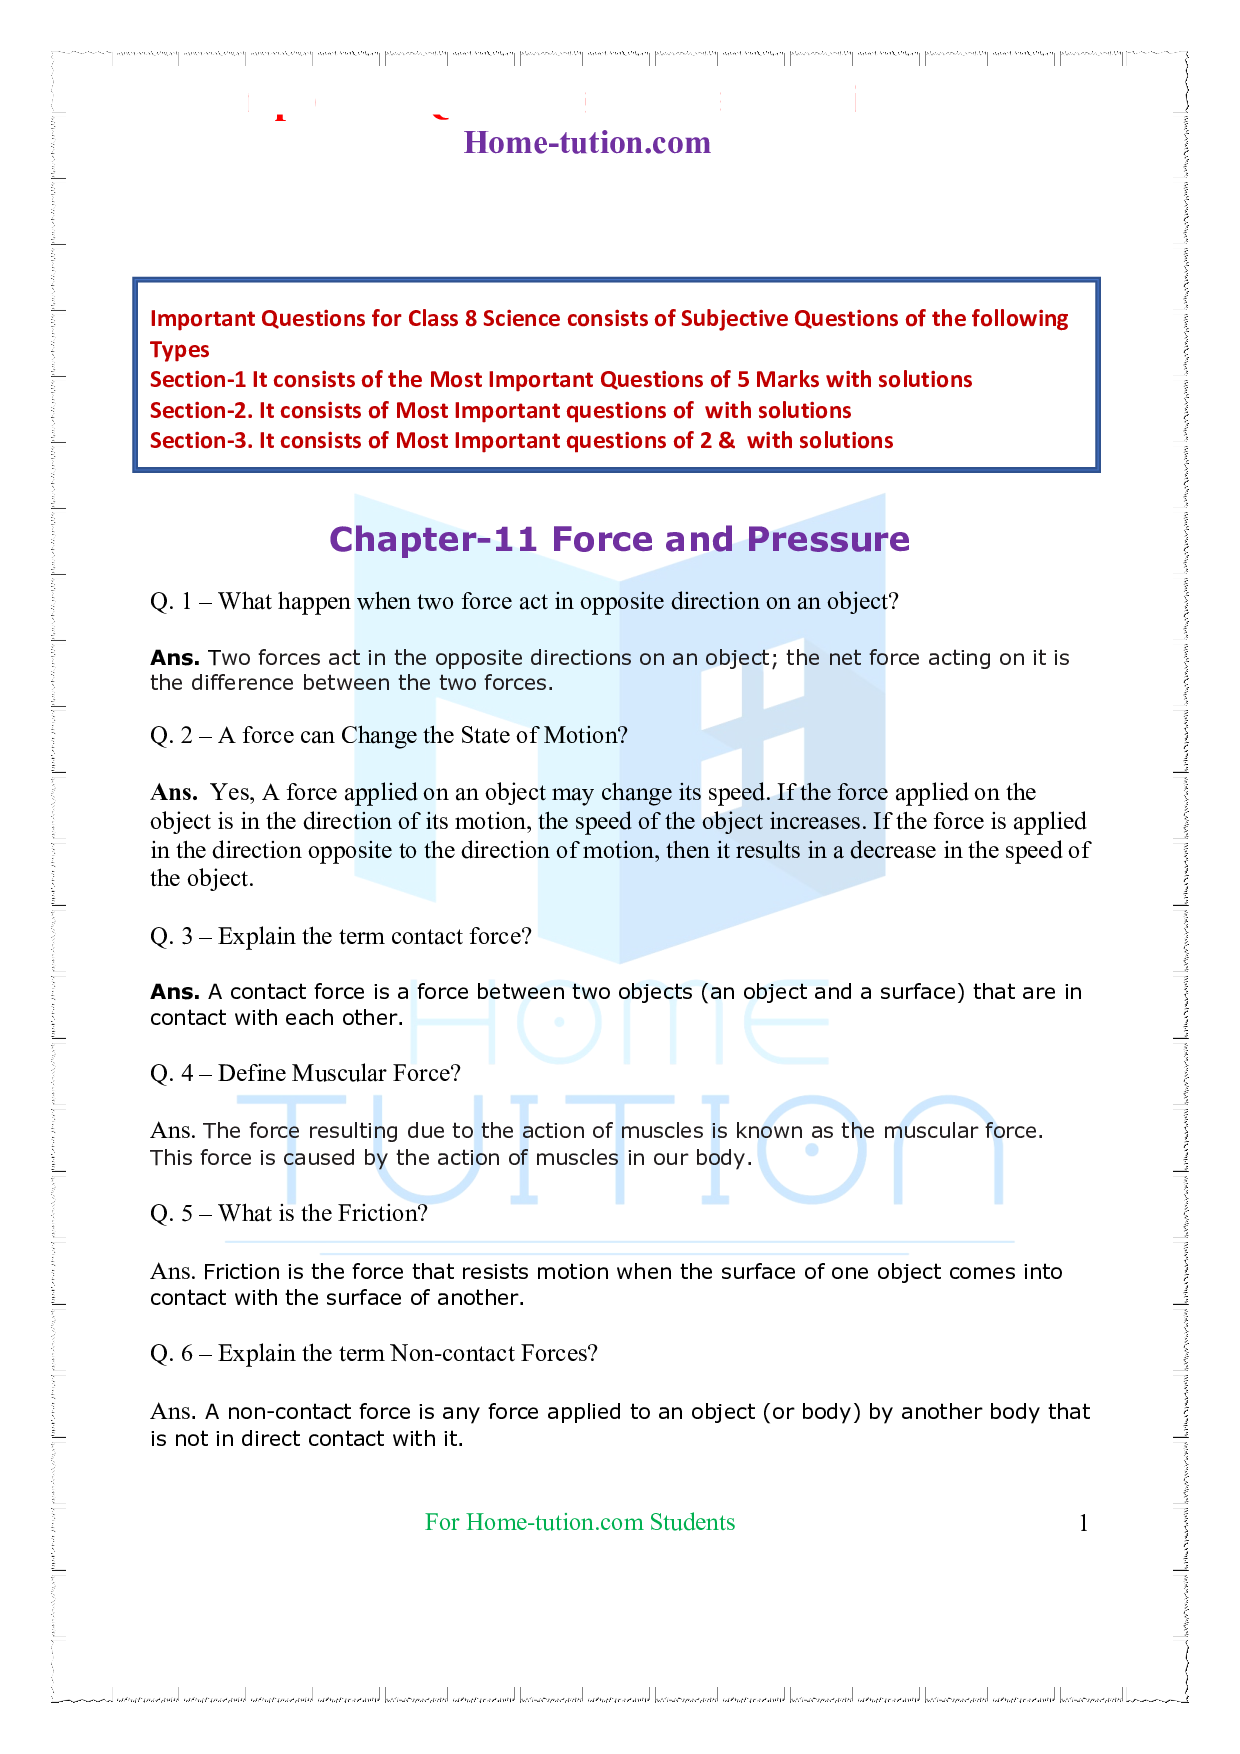 Important Questions for Chapter -11 Force and Pressure